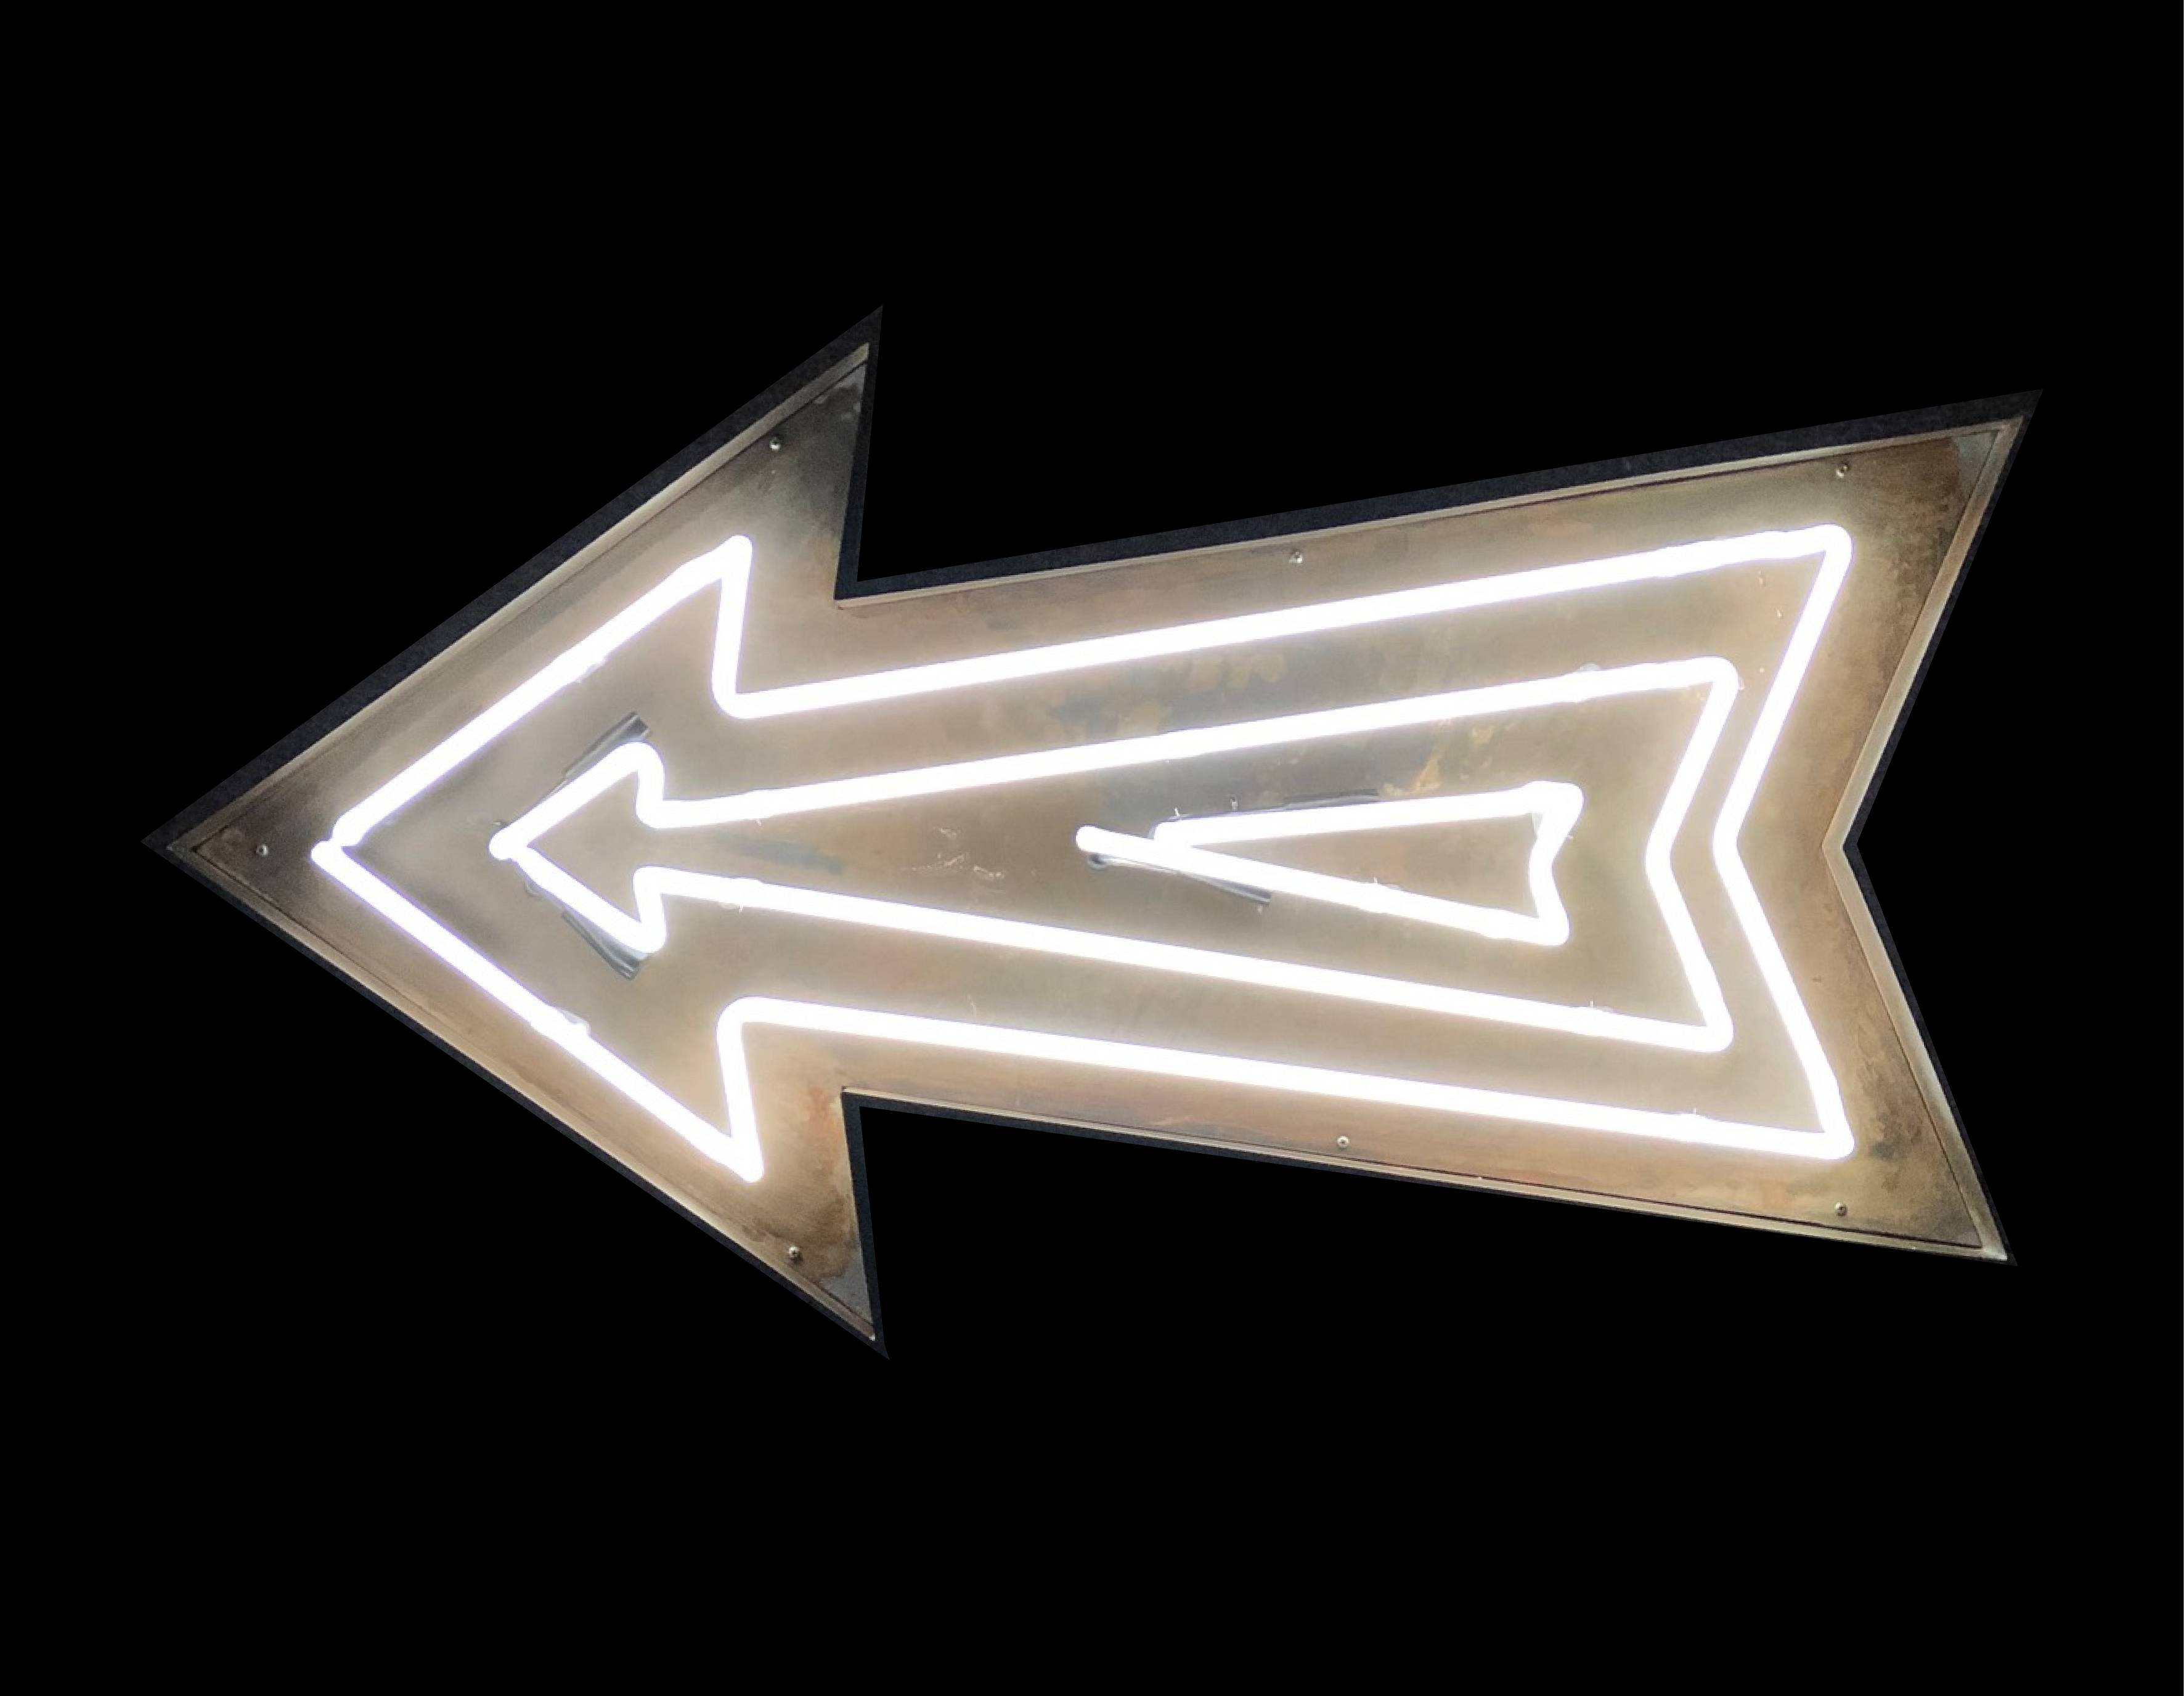 Neon White Arrow - Kemp London - Bespoke neon signs and prop hire.